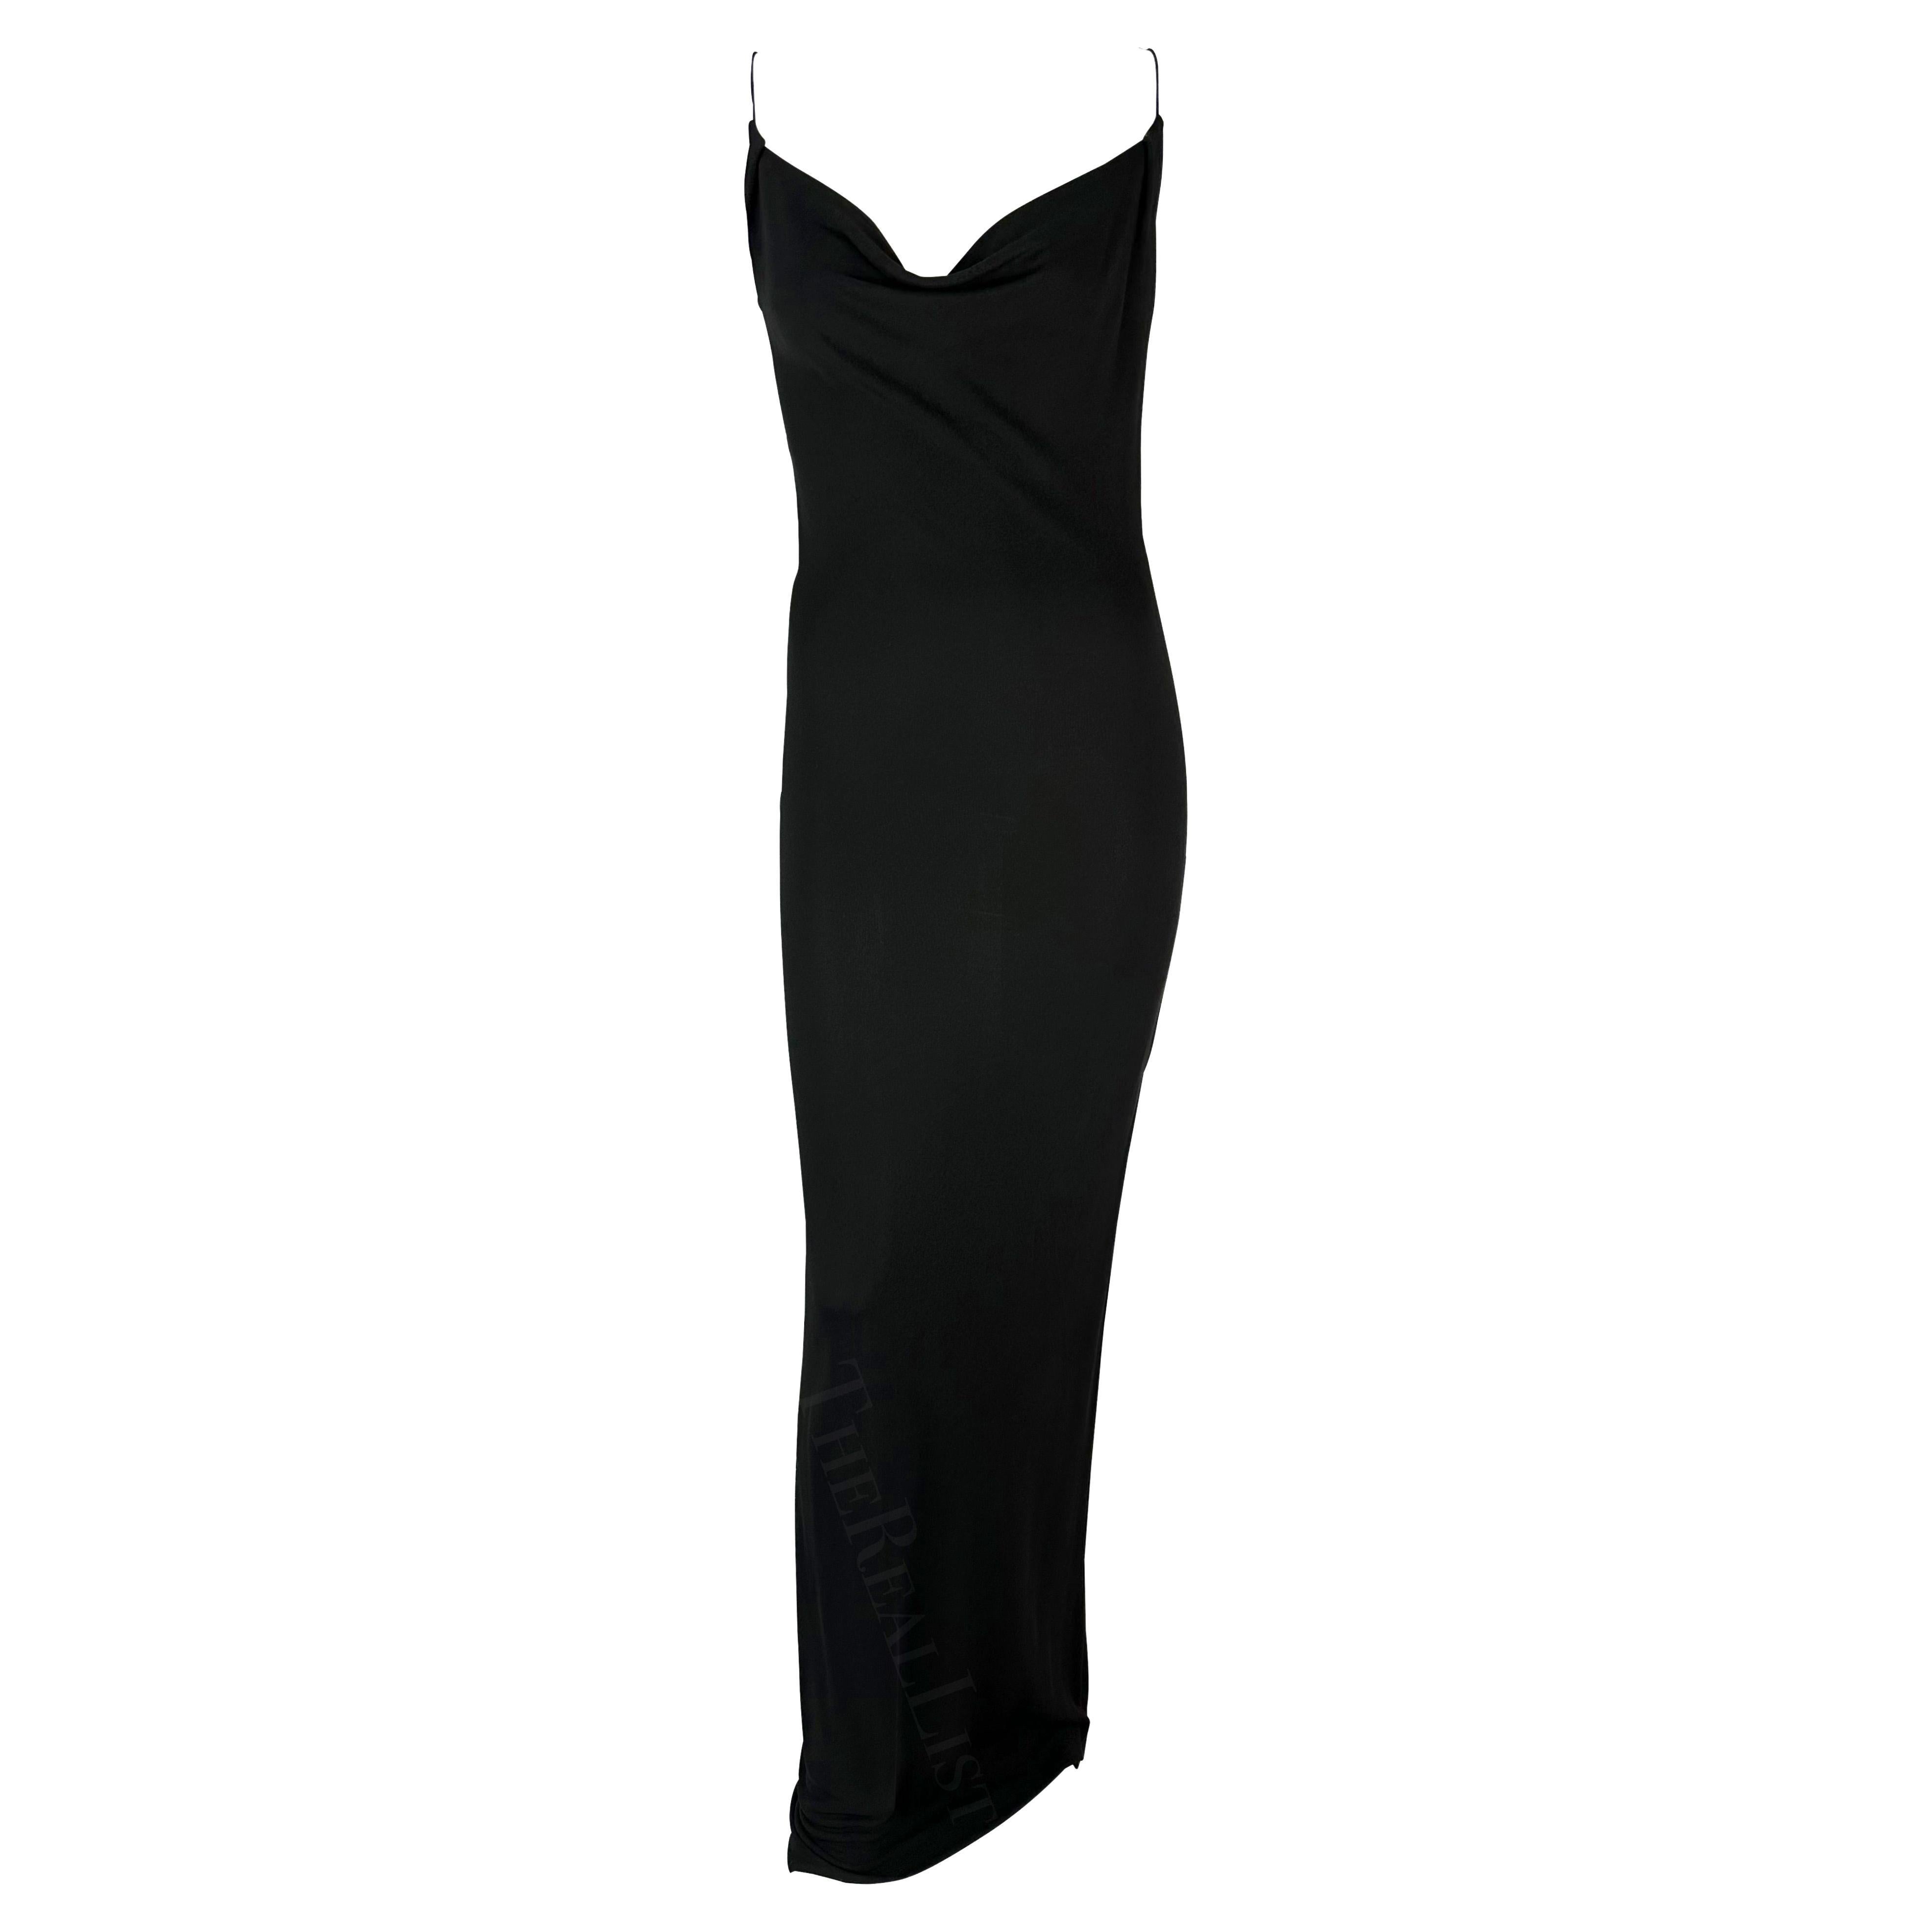 S/S 1997 Gucci by Tom Ford Plunging Cowl Black Slip Bodycon Gown  For Sale